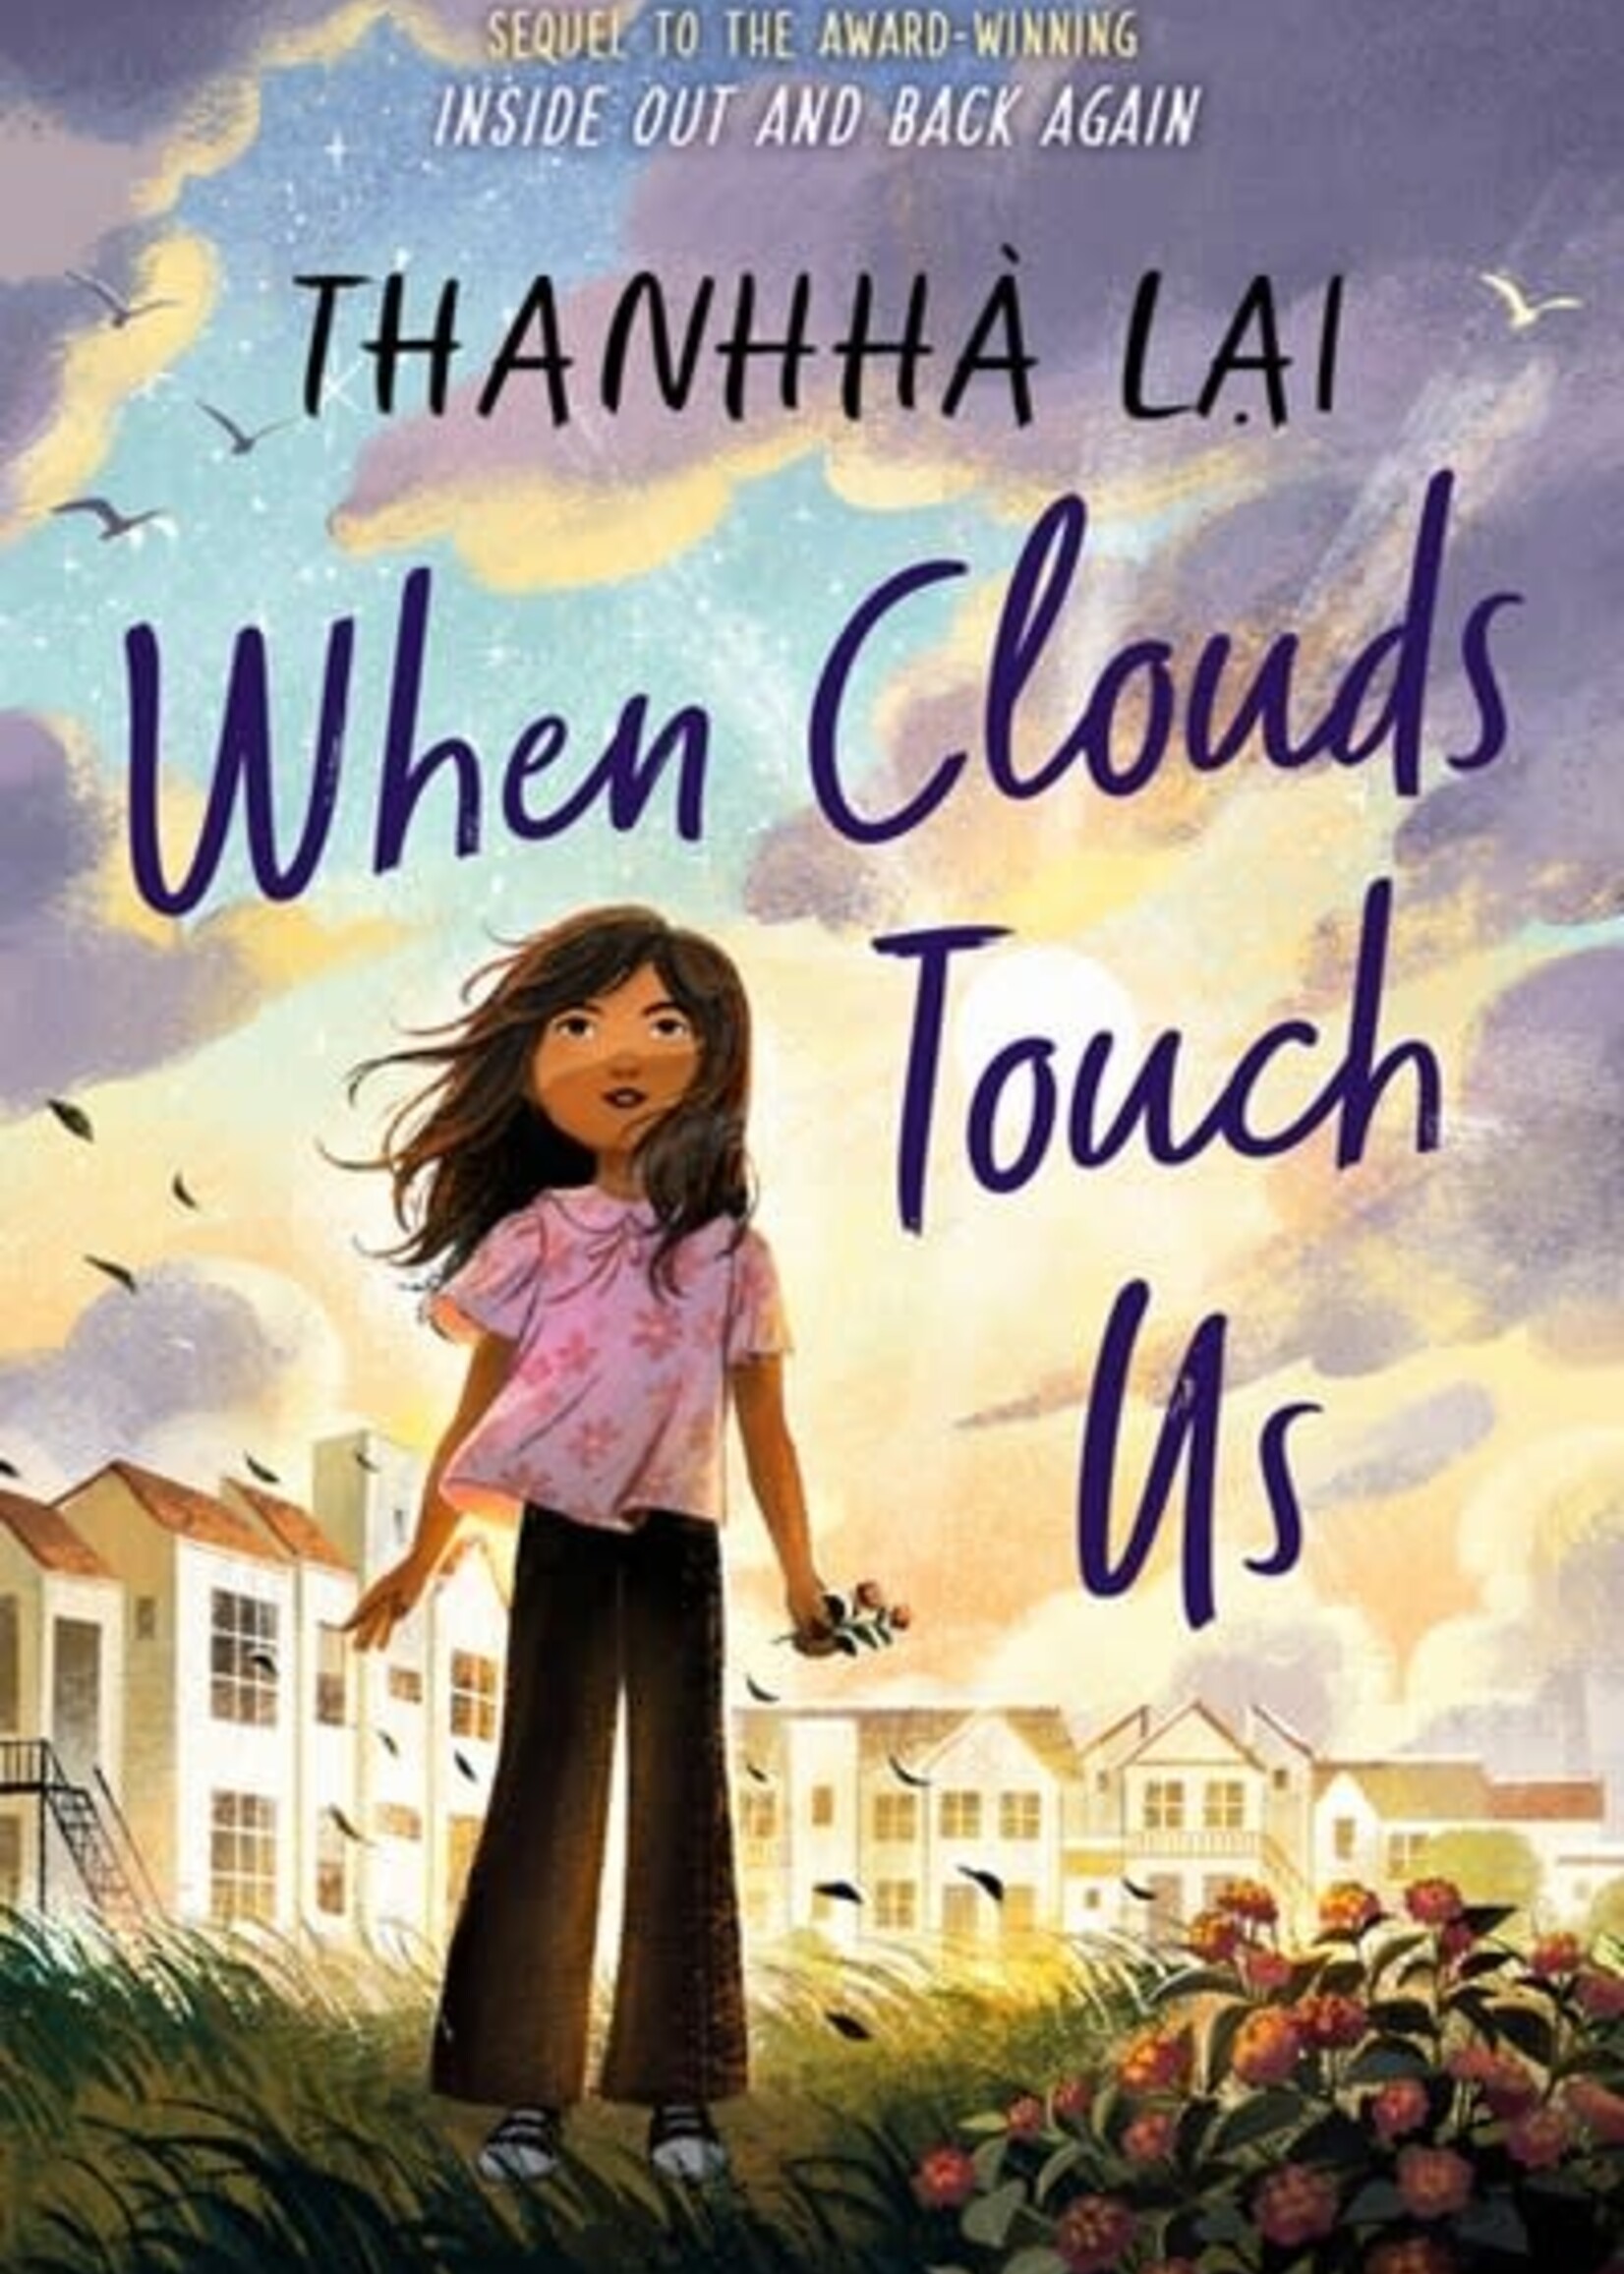 When Clouds Touch Us